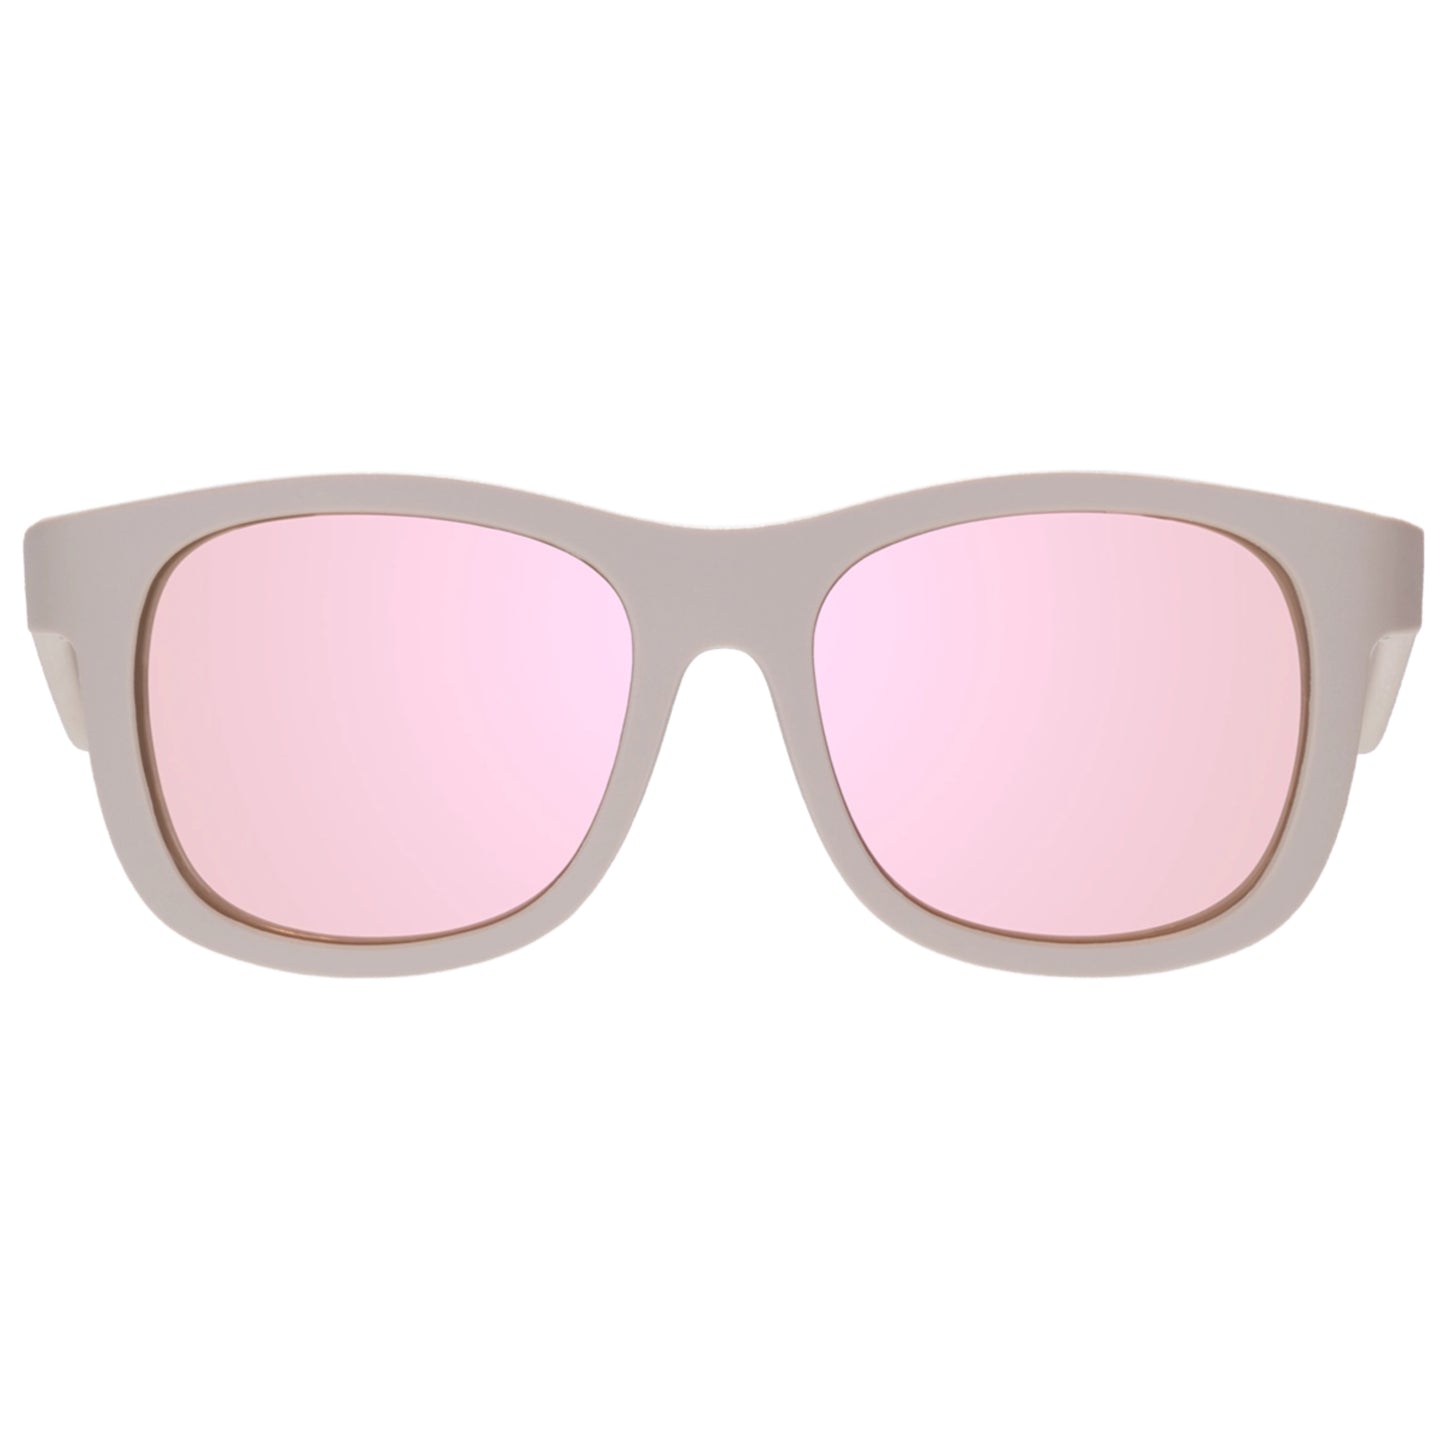 The Hipster Polarized Navigator Sunglasses with Mirrored Lens